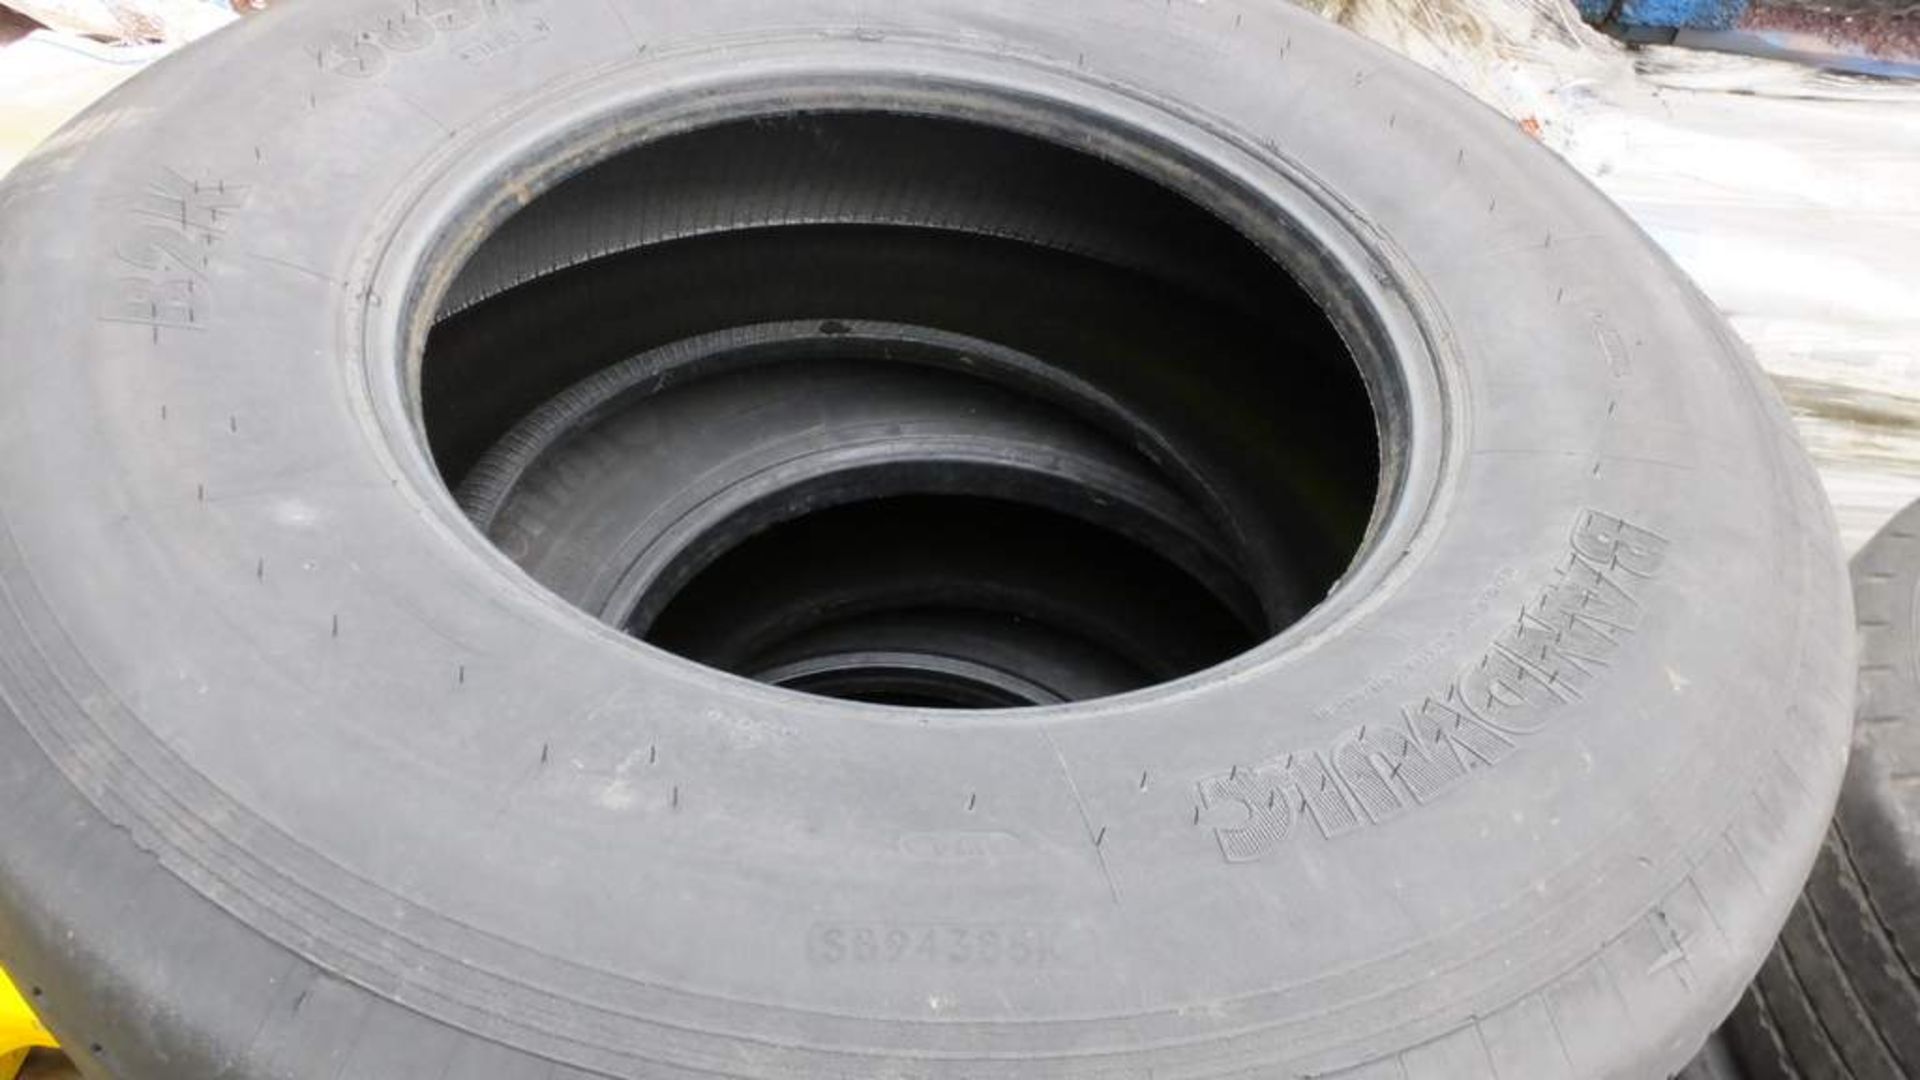 3x Used tyres - 355/65r 22.5 - Image 3 of 3